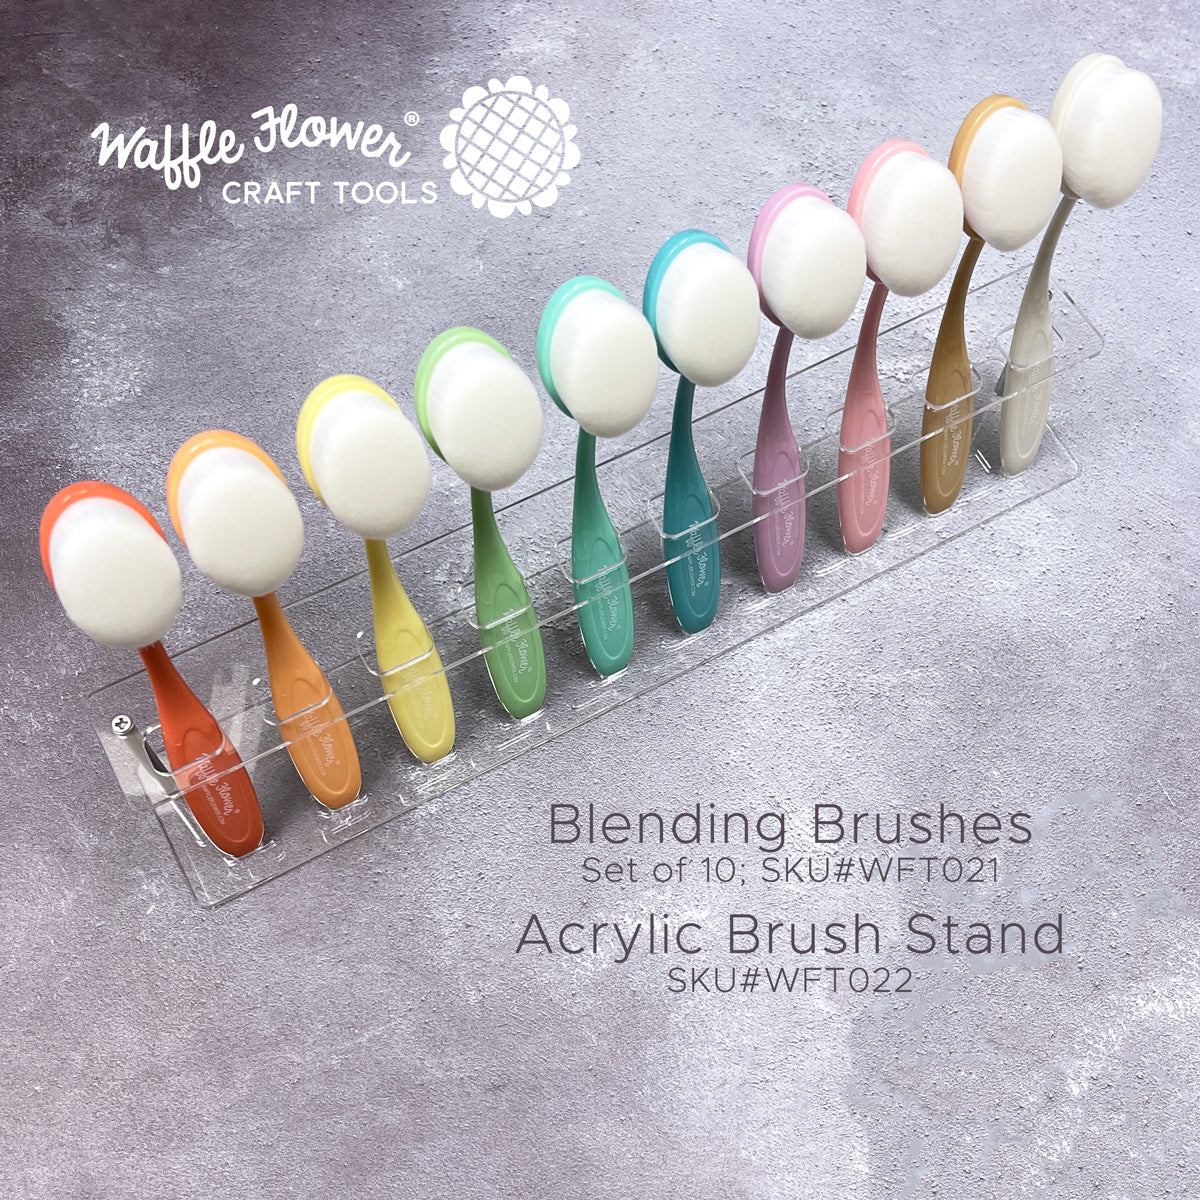 The Best Blending Brushes for Card Making and Paper Crafts 